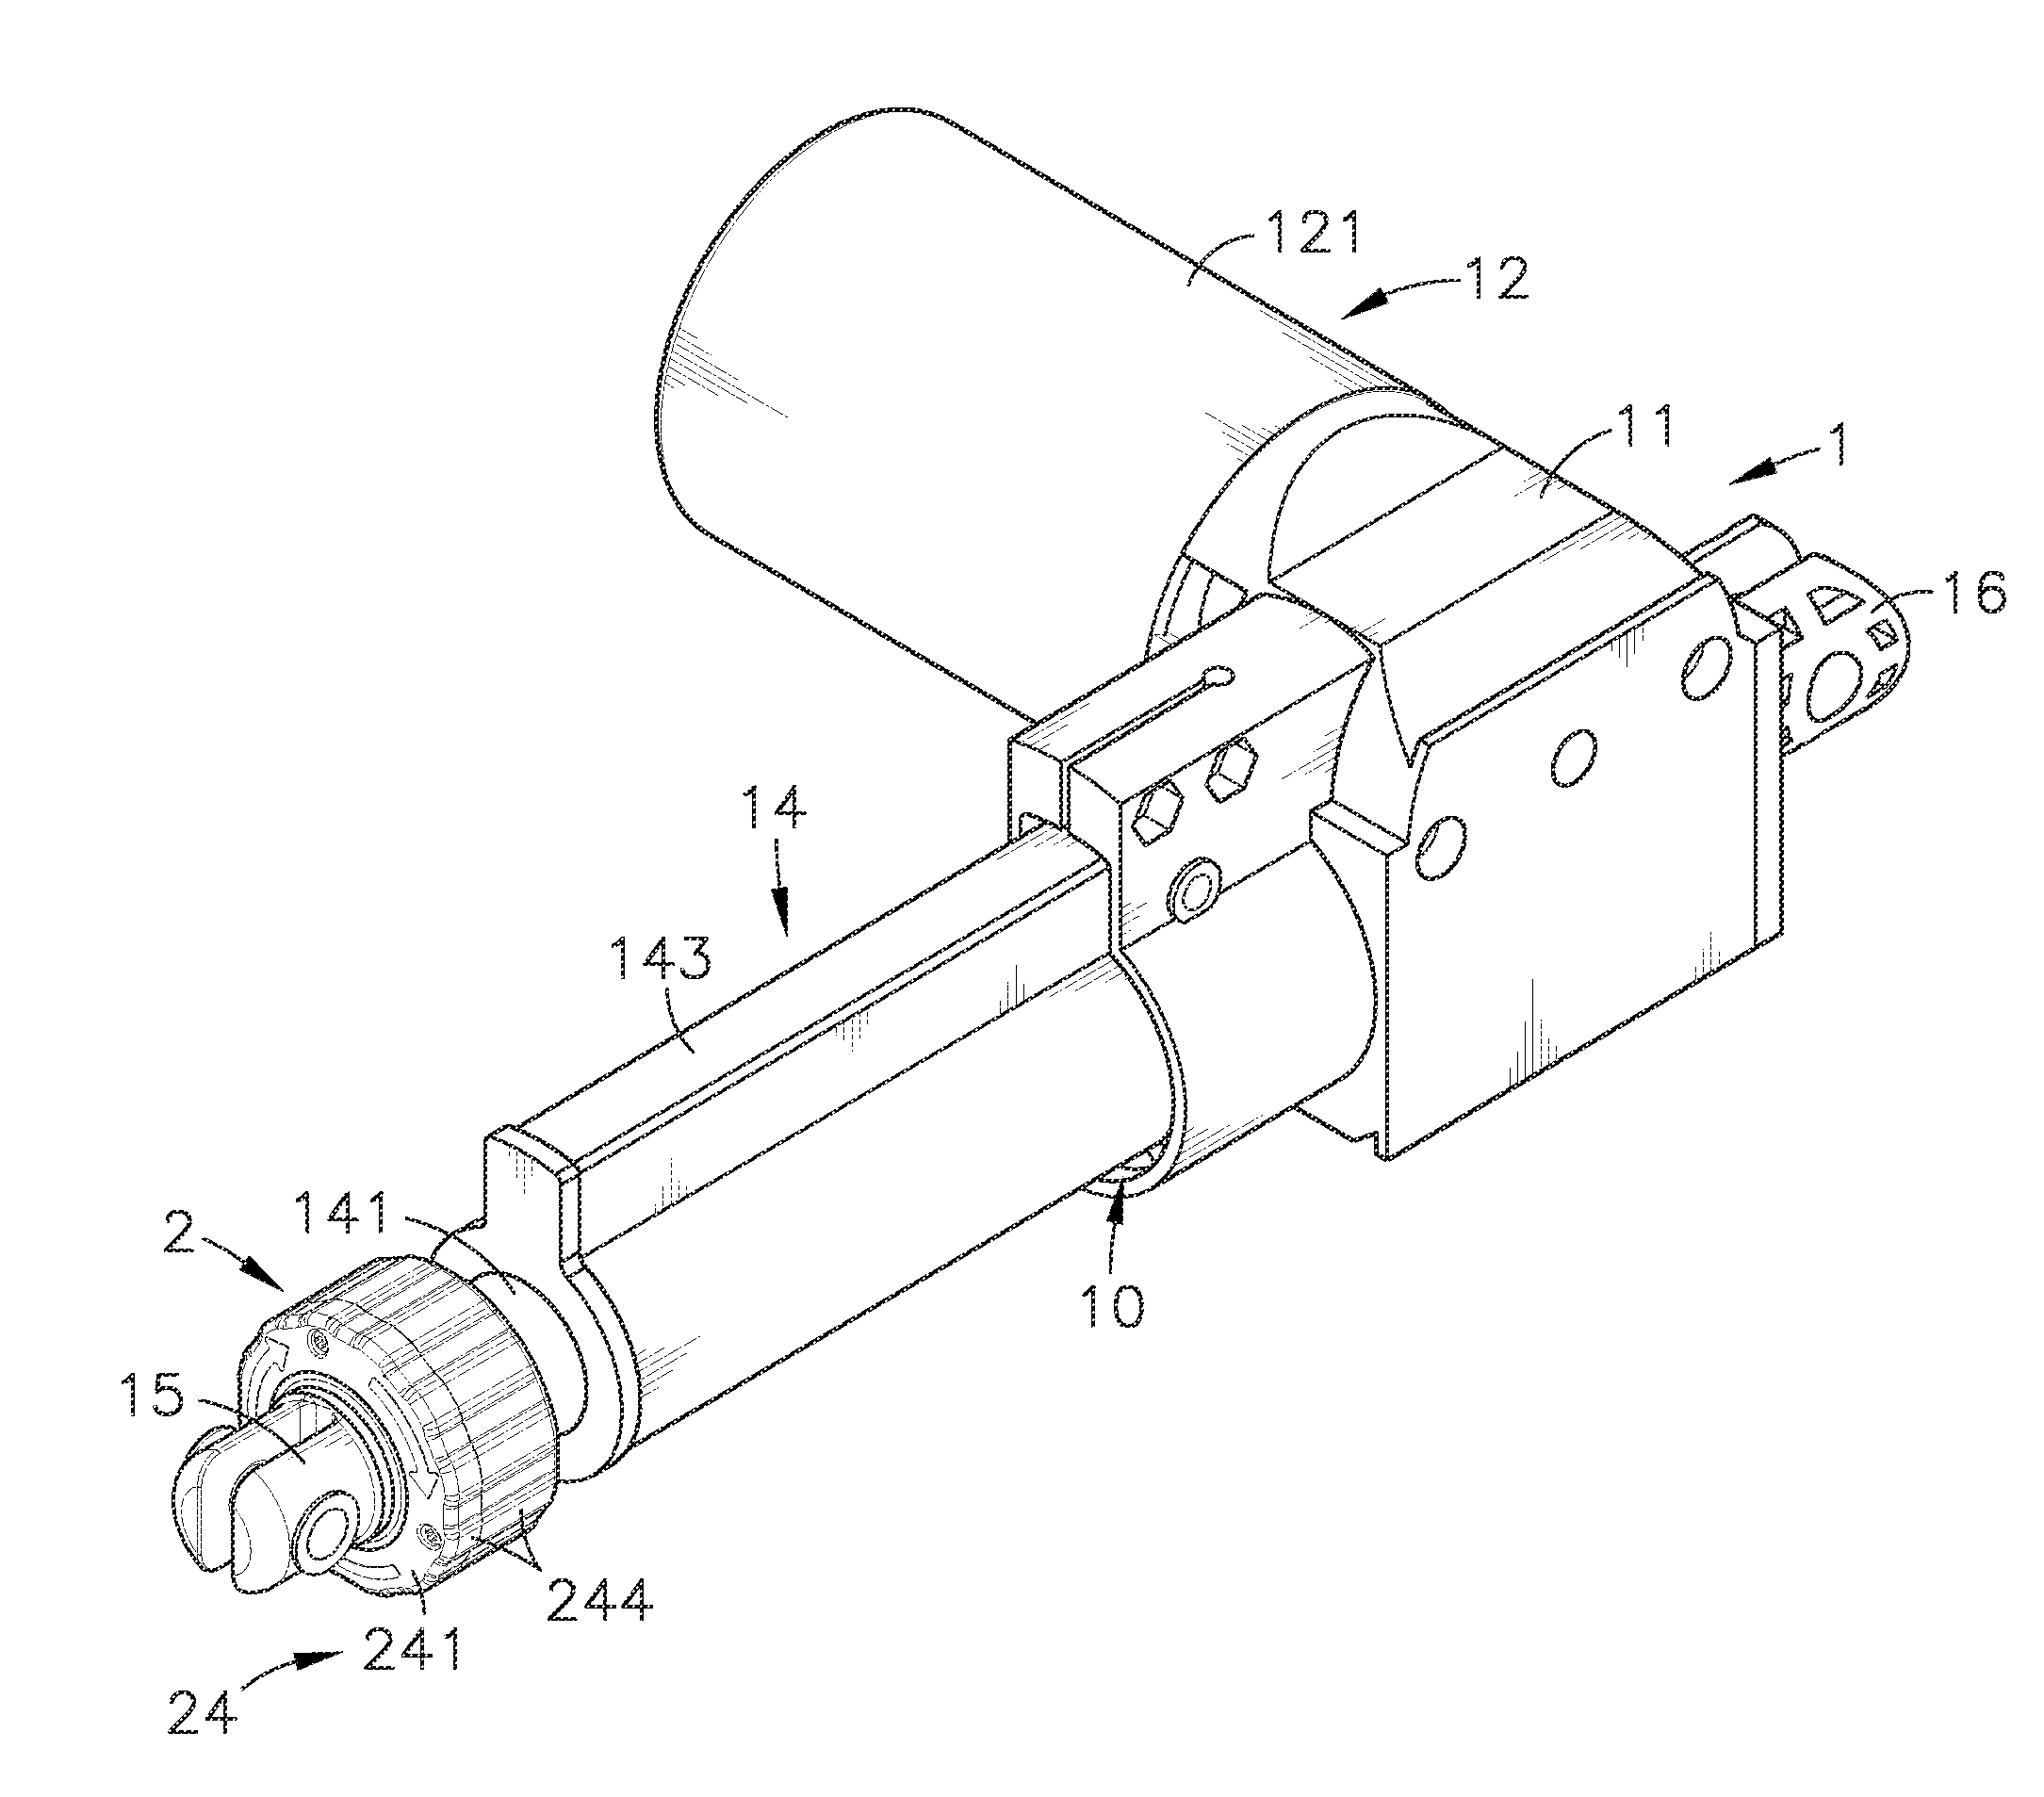 Electric push bar assembly